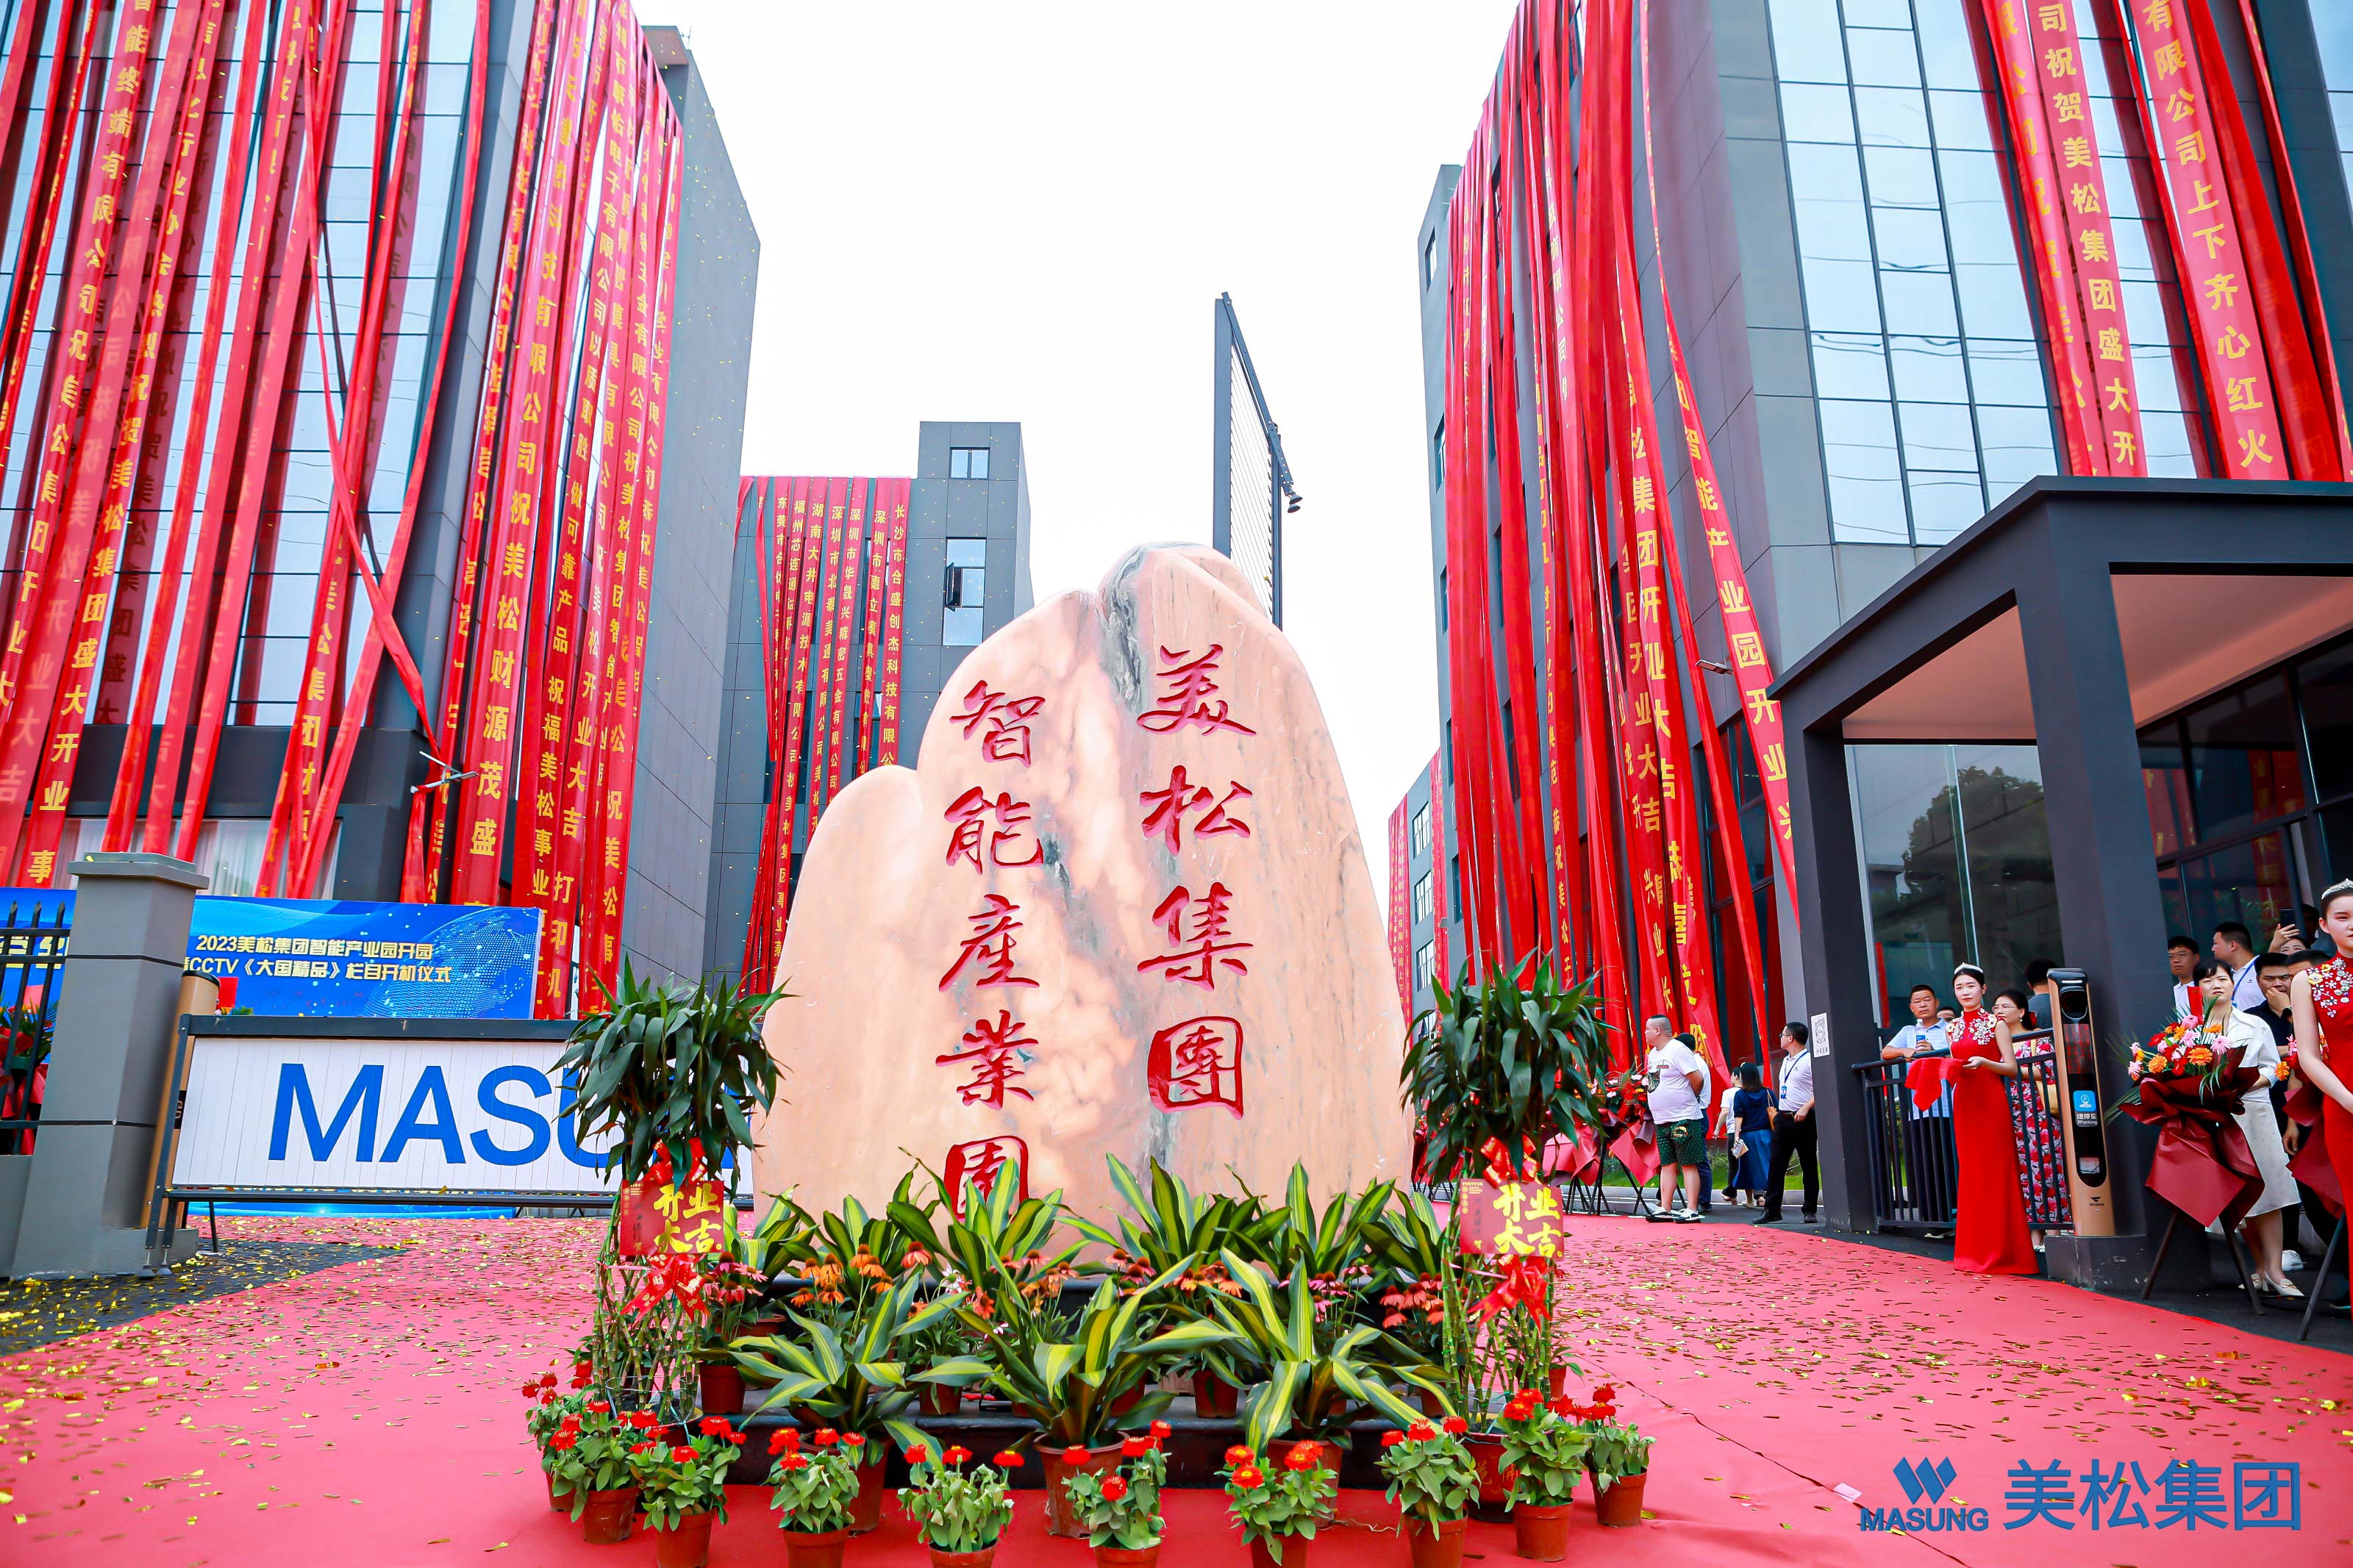 The opening ceremony of the intelligent industrial park of Masung Group and the coverage of CCTV "Great Nation" column